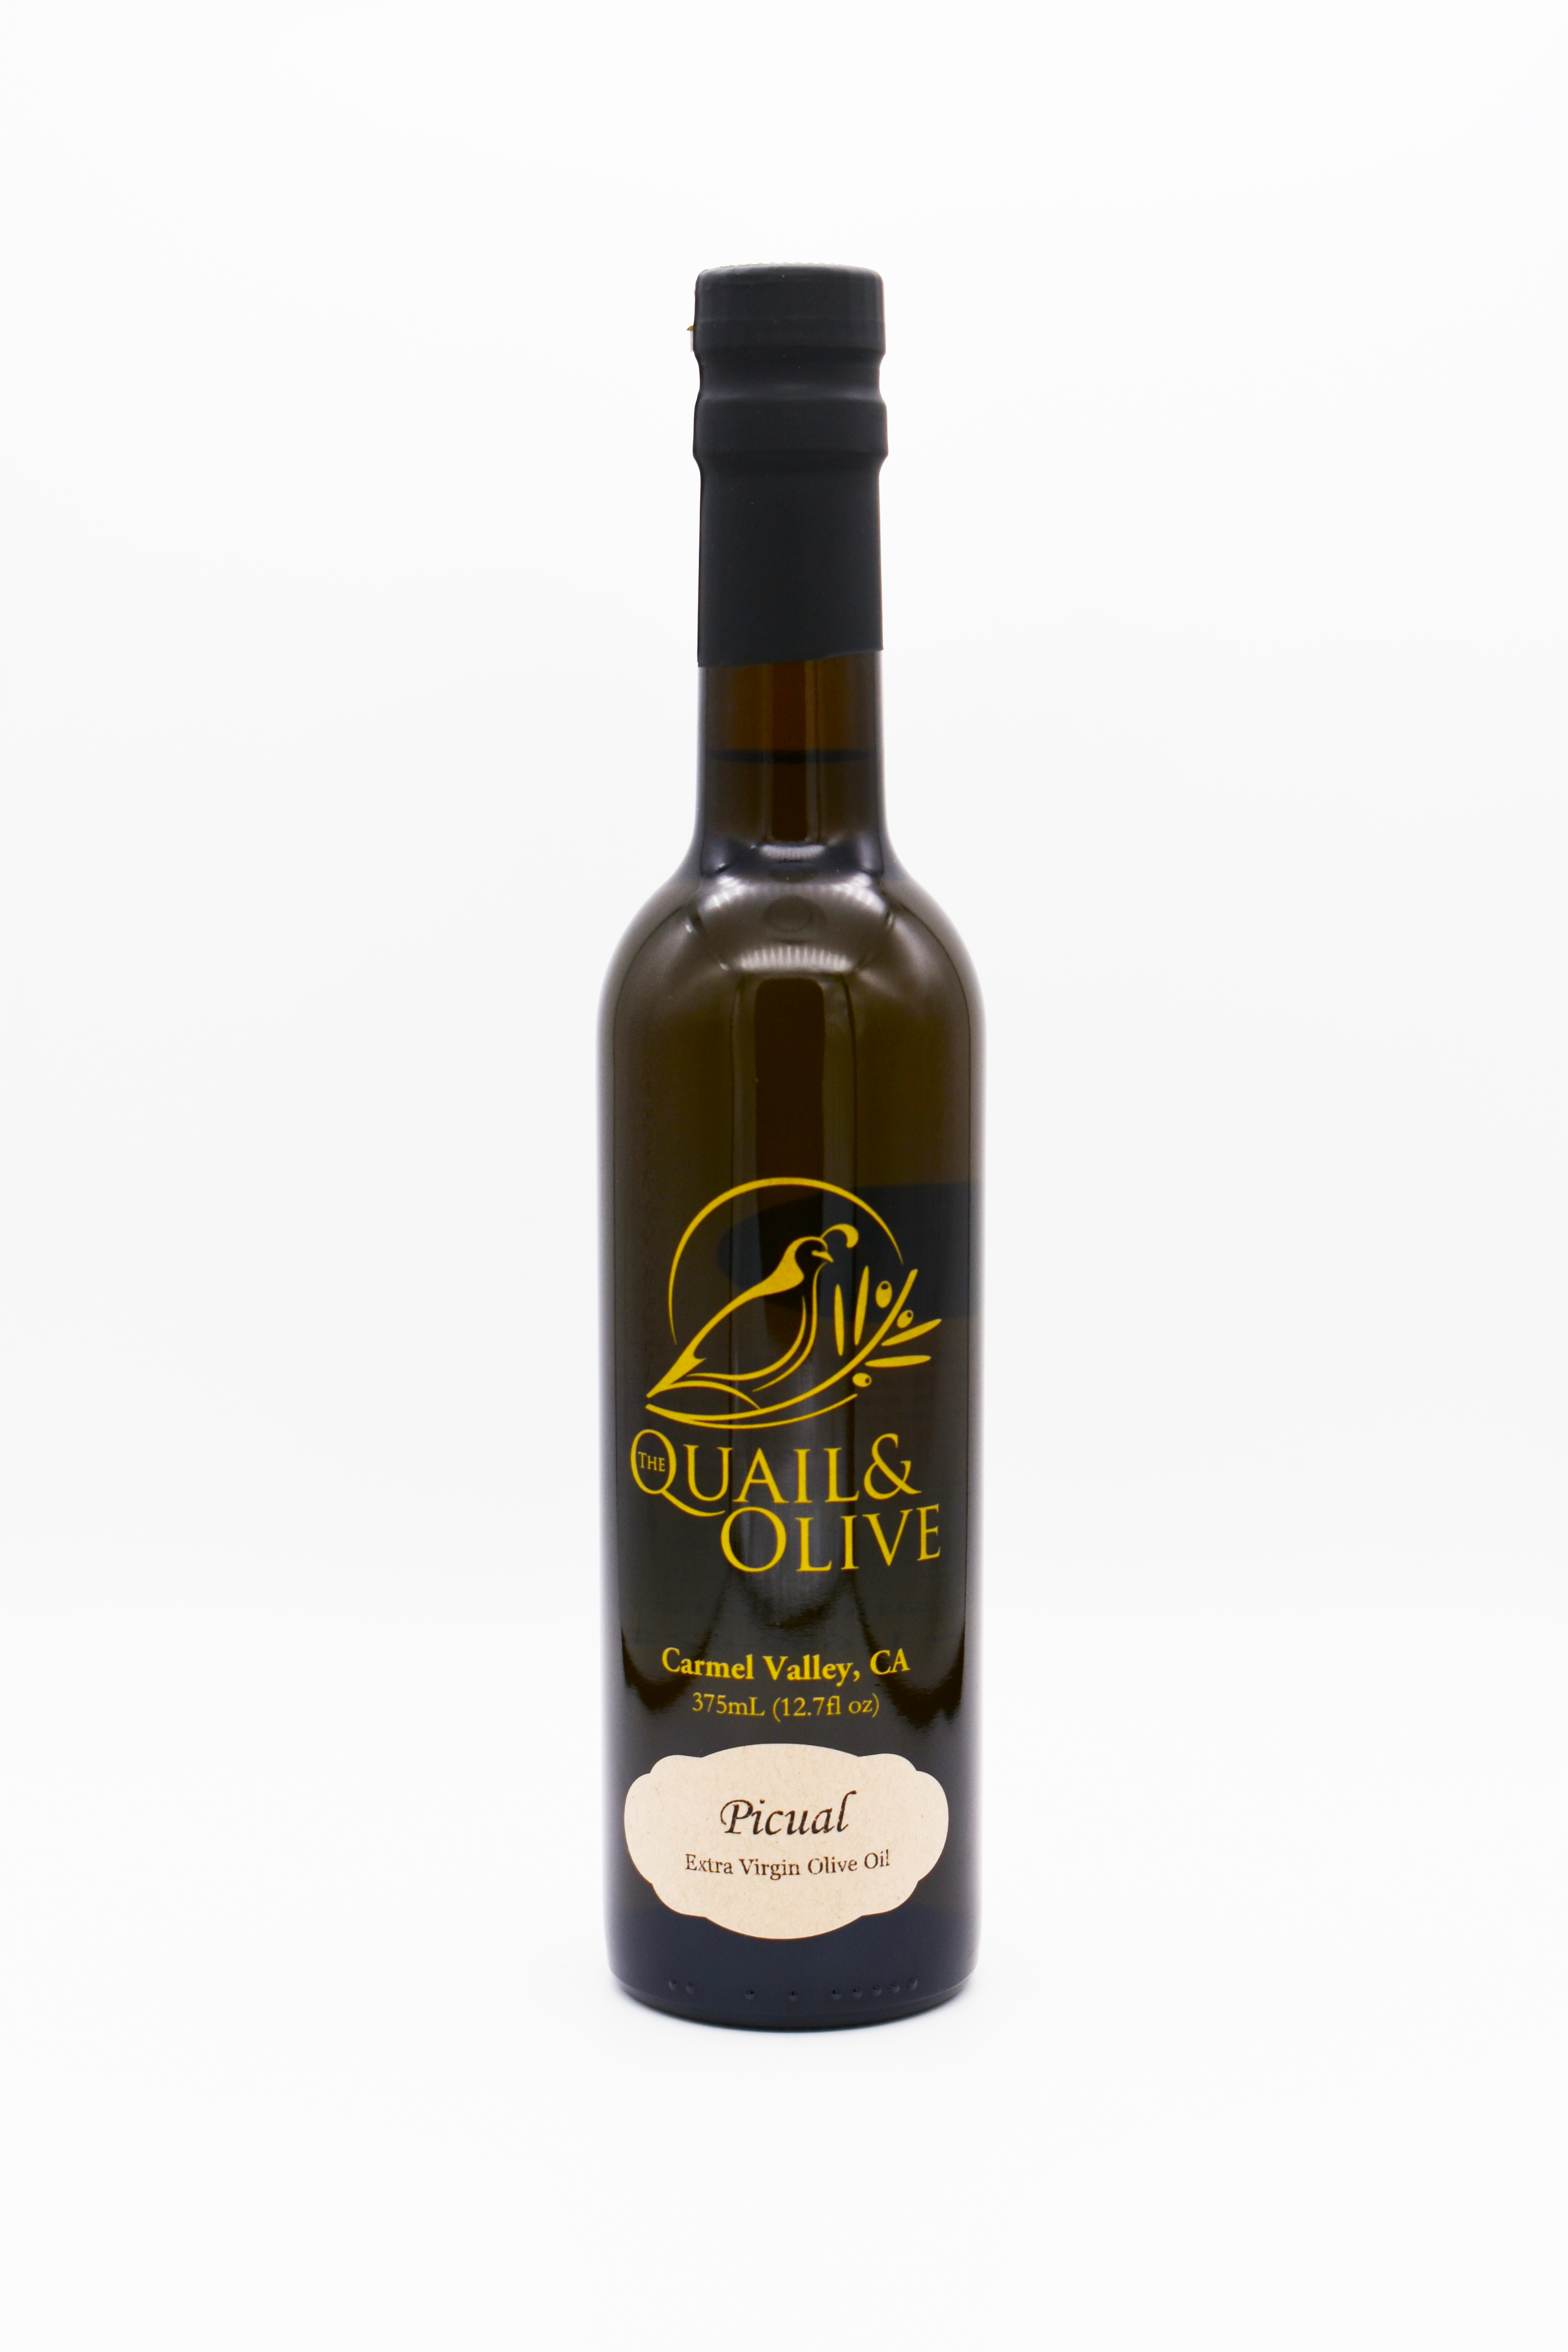 Product Image for Piqual EVOO